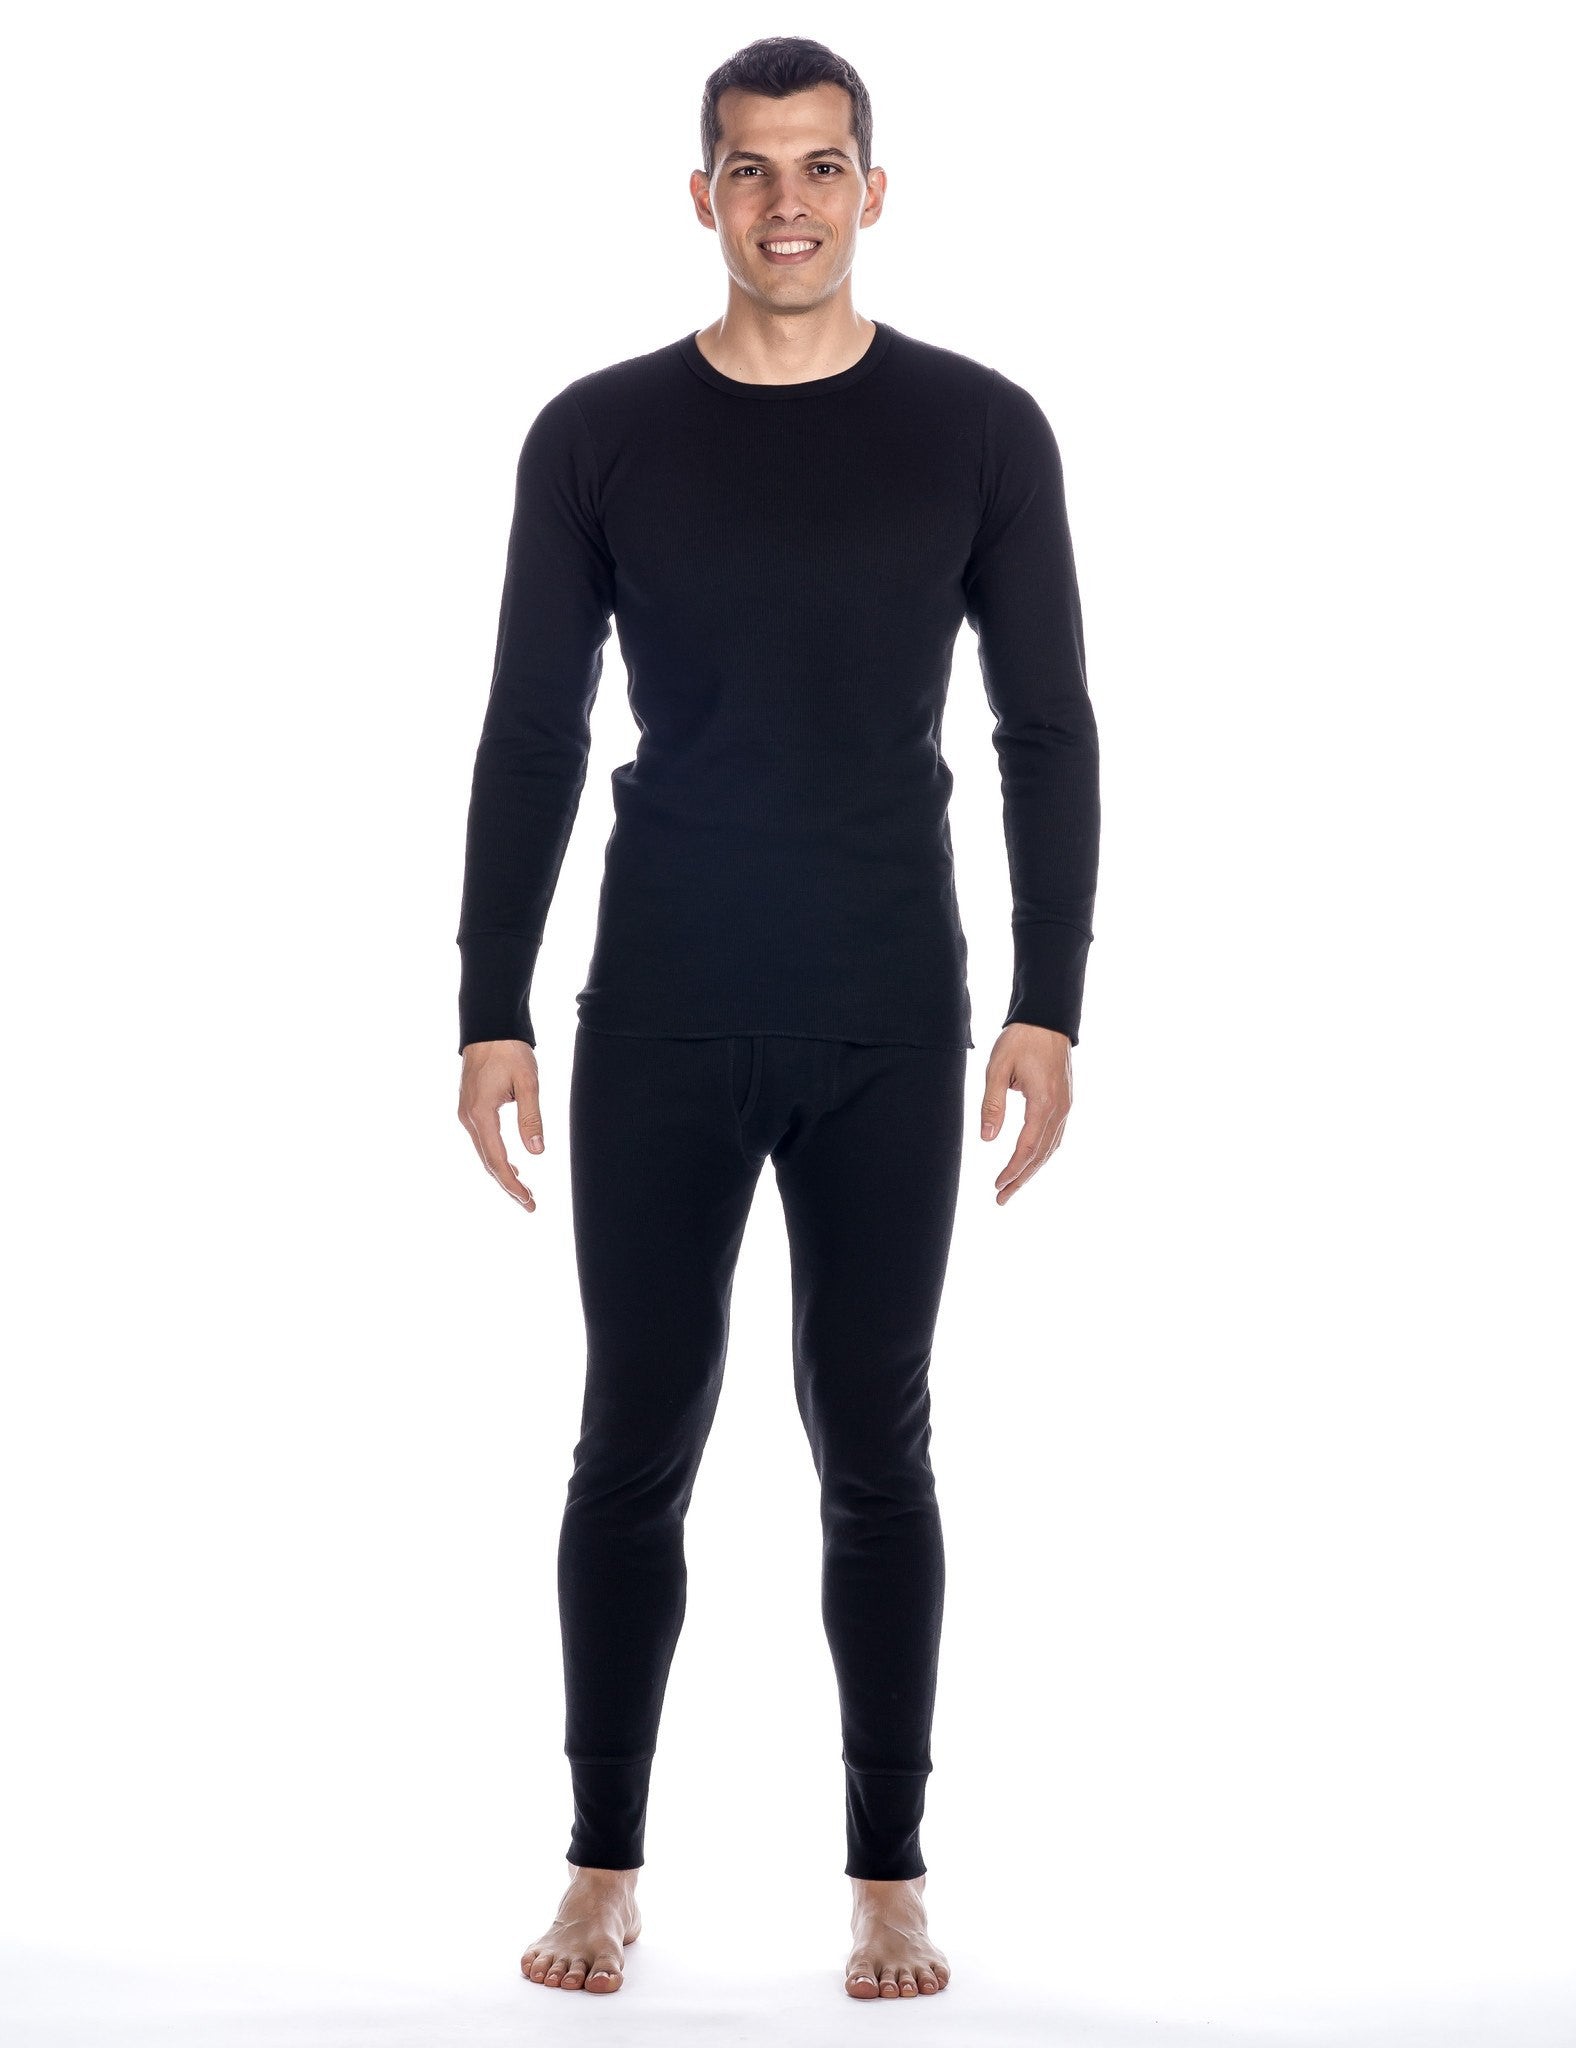 Men's Extreme Cold Waffle Knit Thermal Top and Bottom Set